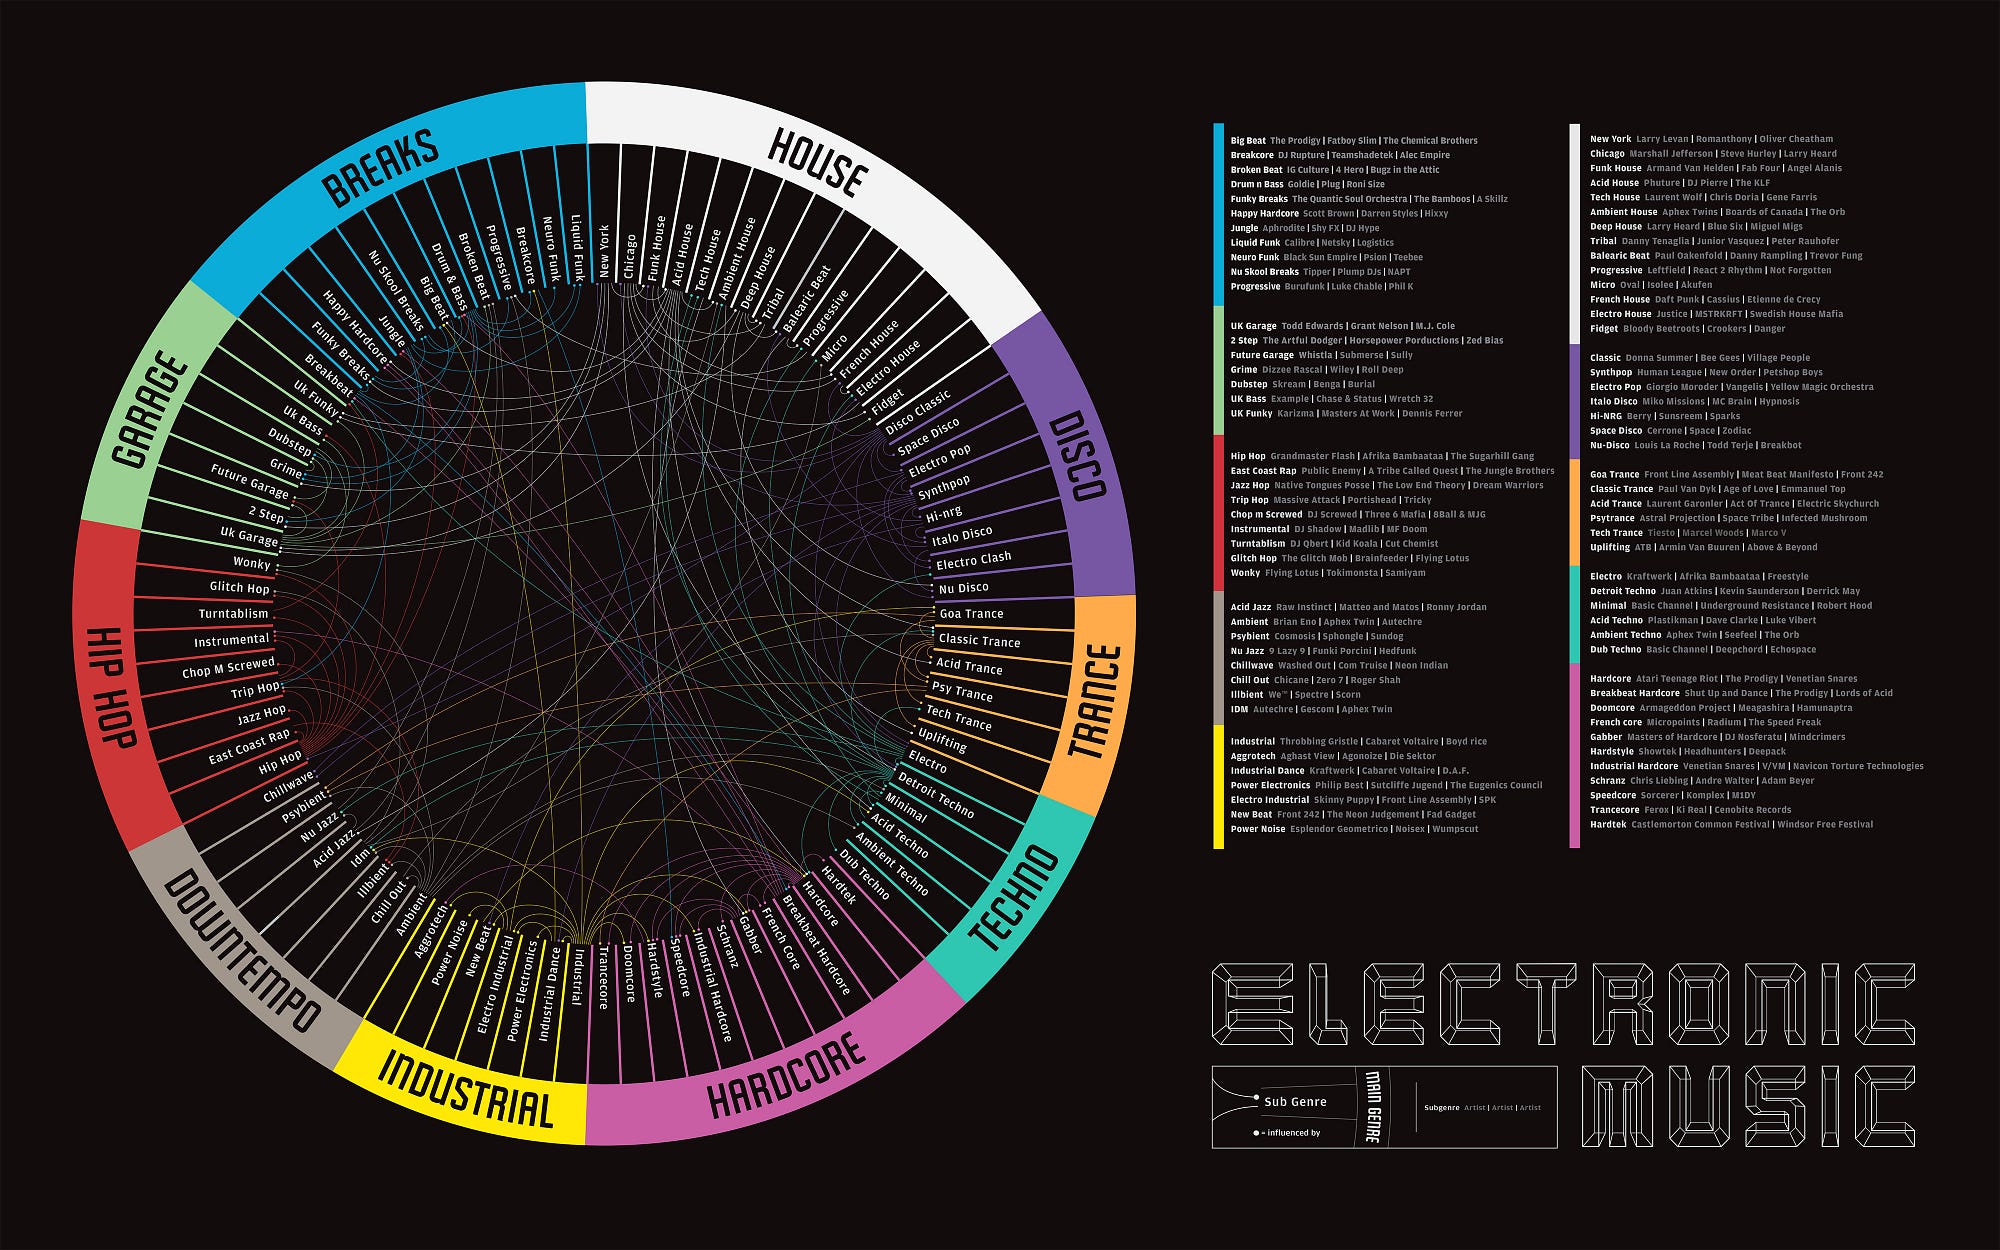 Visualization: How Electronic Music Subgenres are Related to Each Other |  by Nate Simantov | Village.fm | Medium